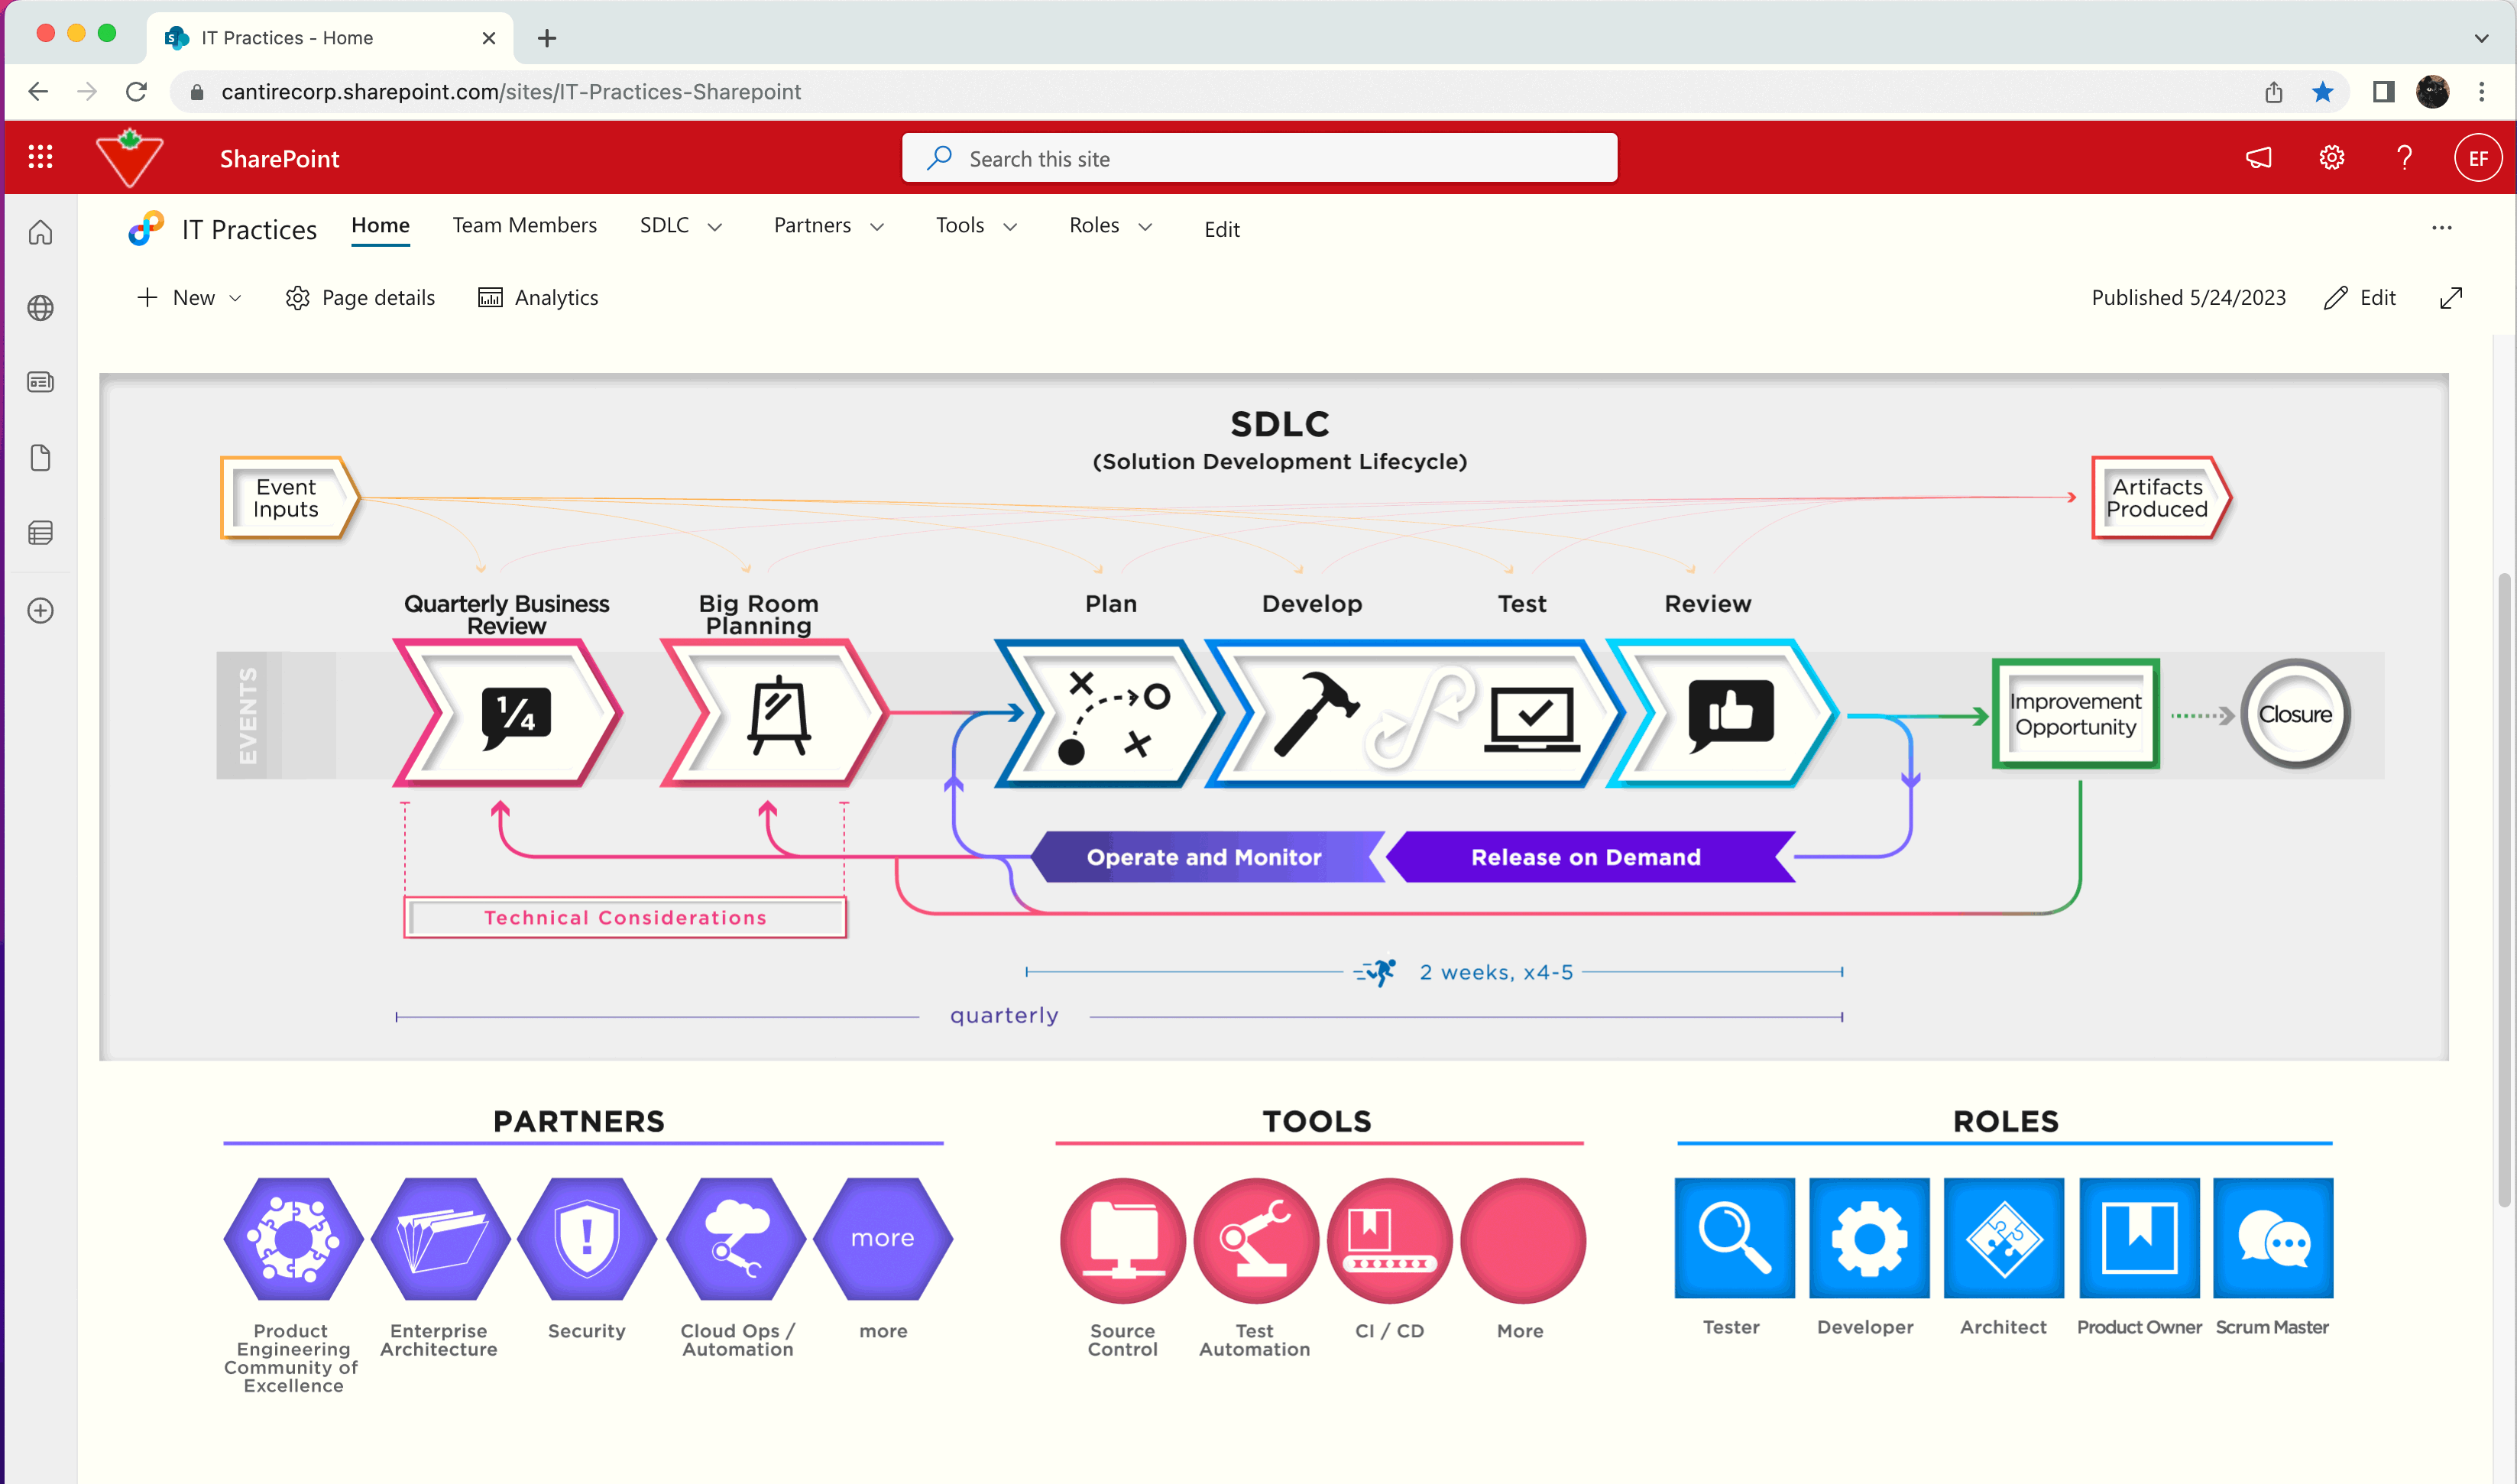 website design for Canadian Tire that contains an interactive flowchart of their solution development cycle.